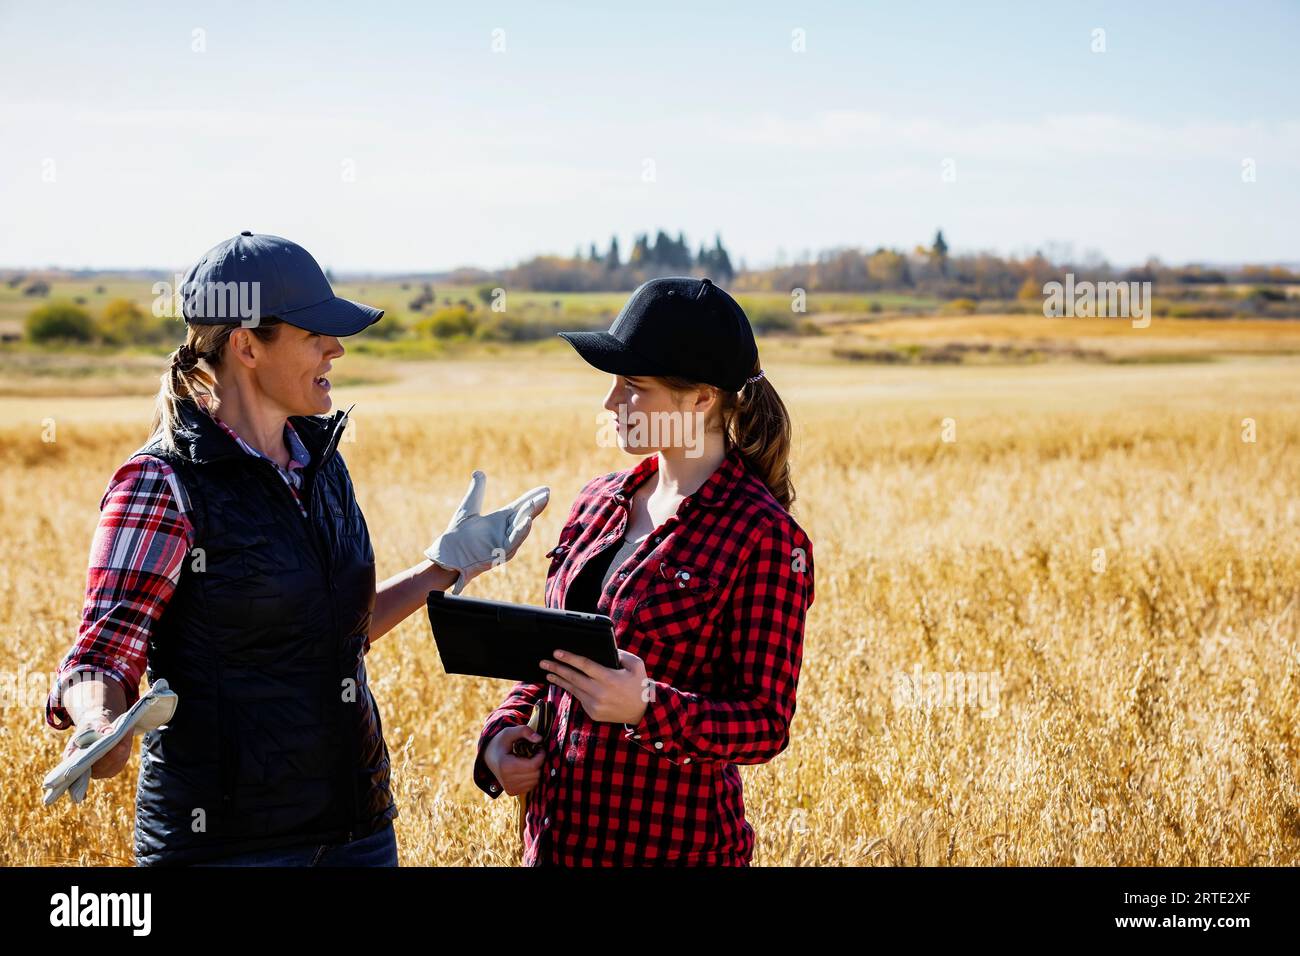 A mature farm woman standing in a field working together with a young woman at harvest time, using advanced agricultural software technology on a pad Stock Photo